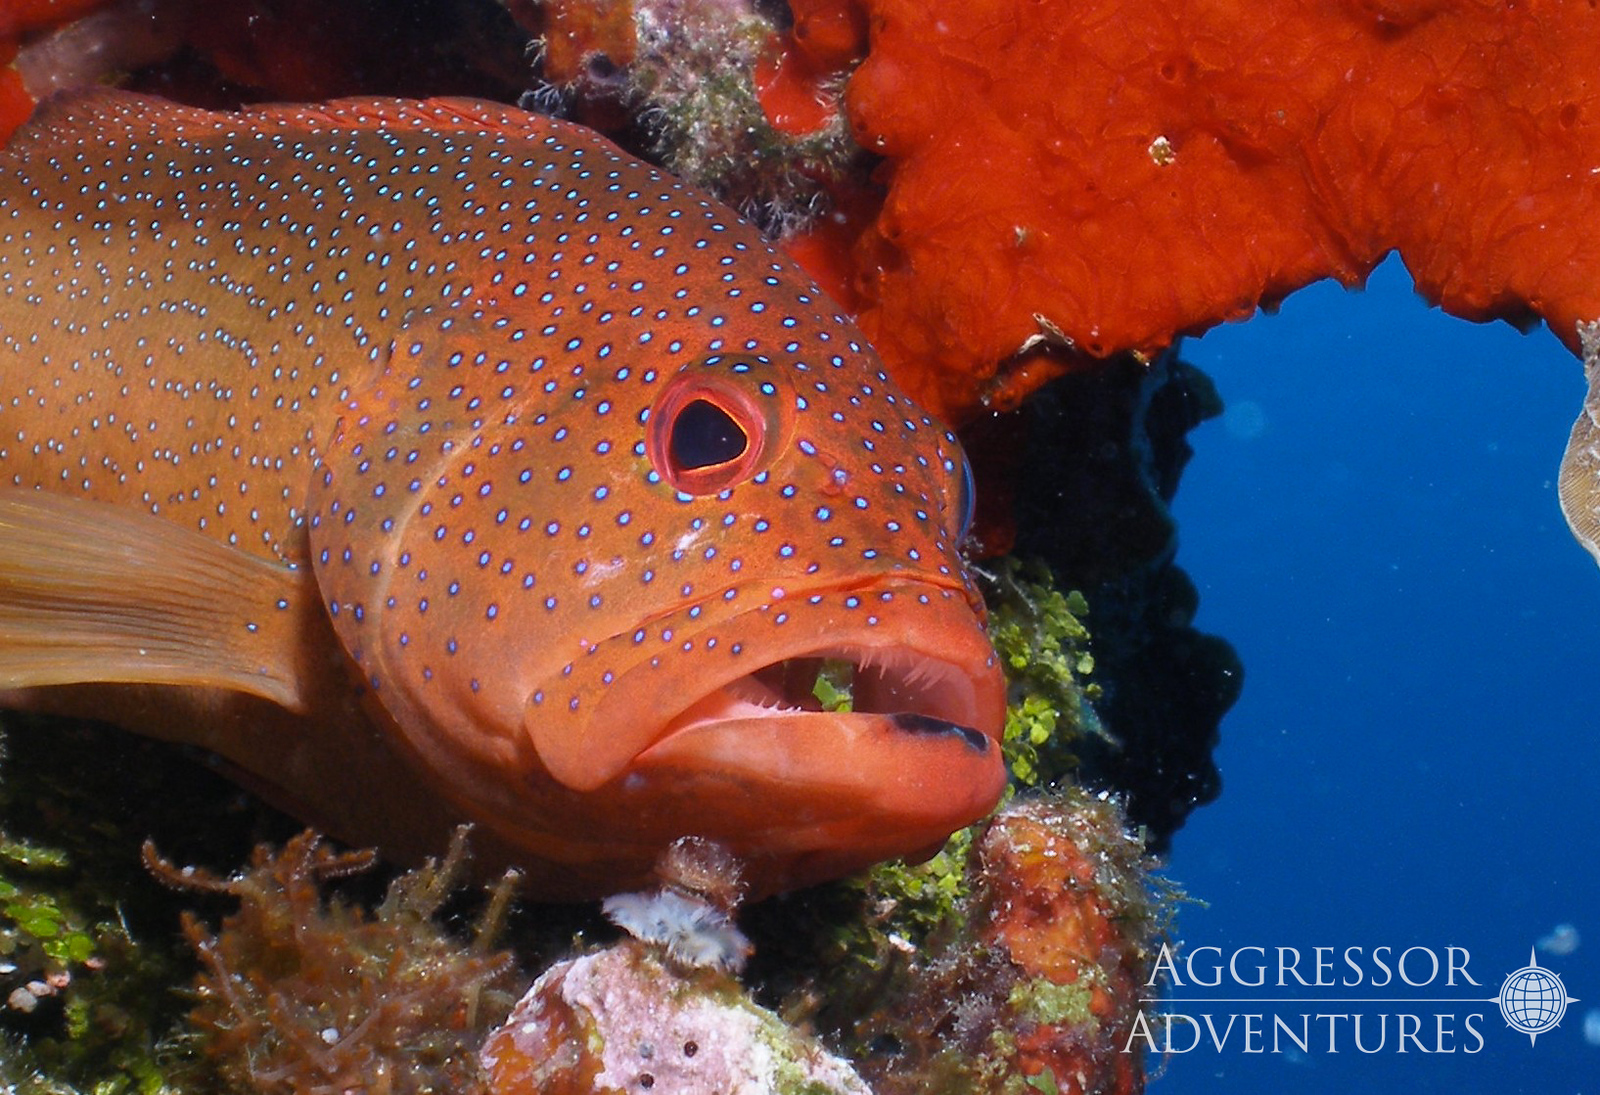 A large red fish comes out of the coral. Inside it's mouth you can see a small tiny fish.